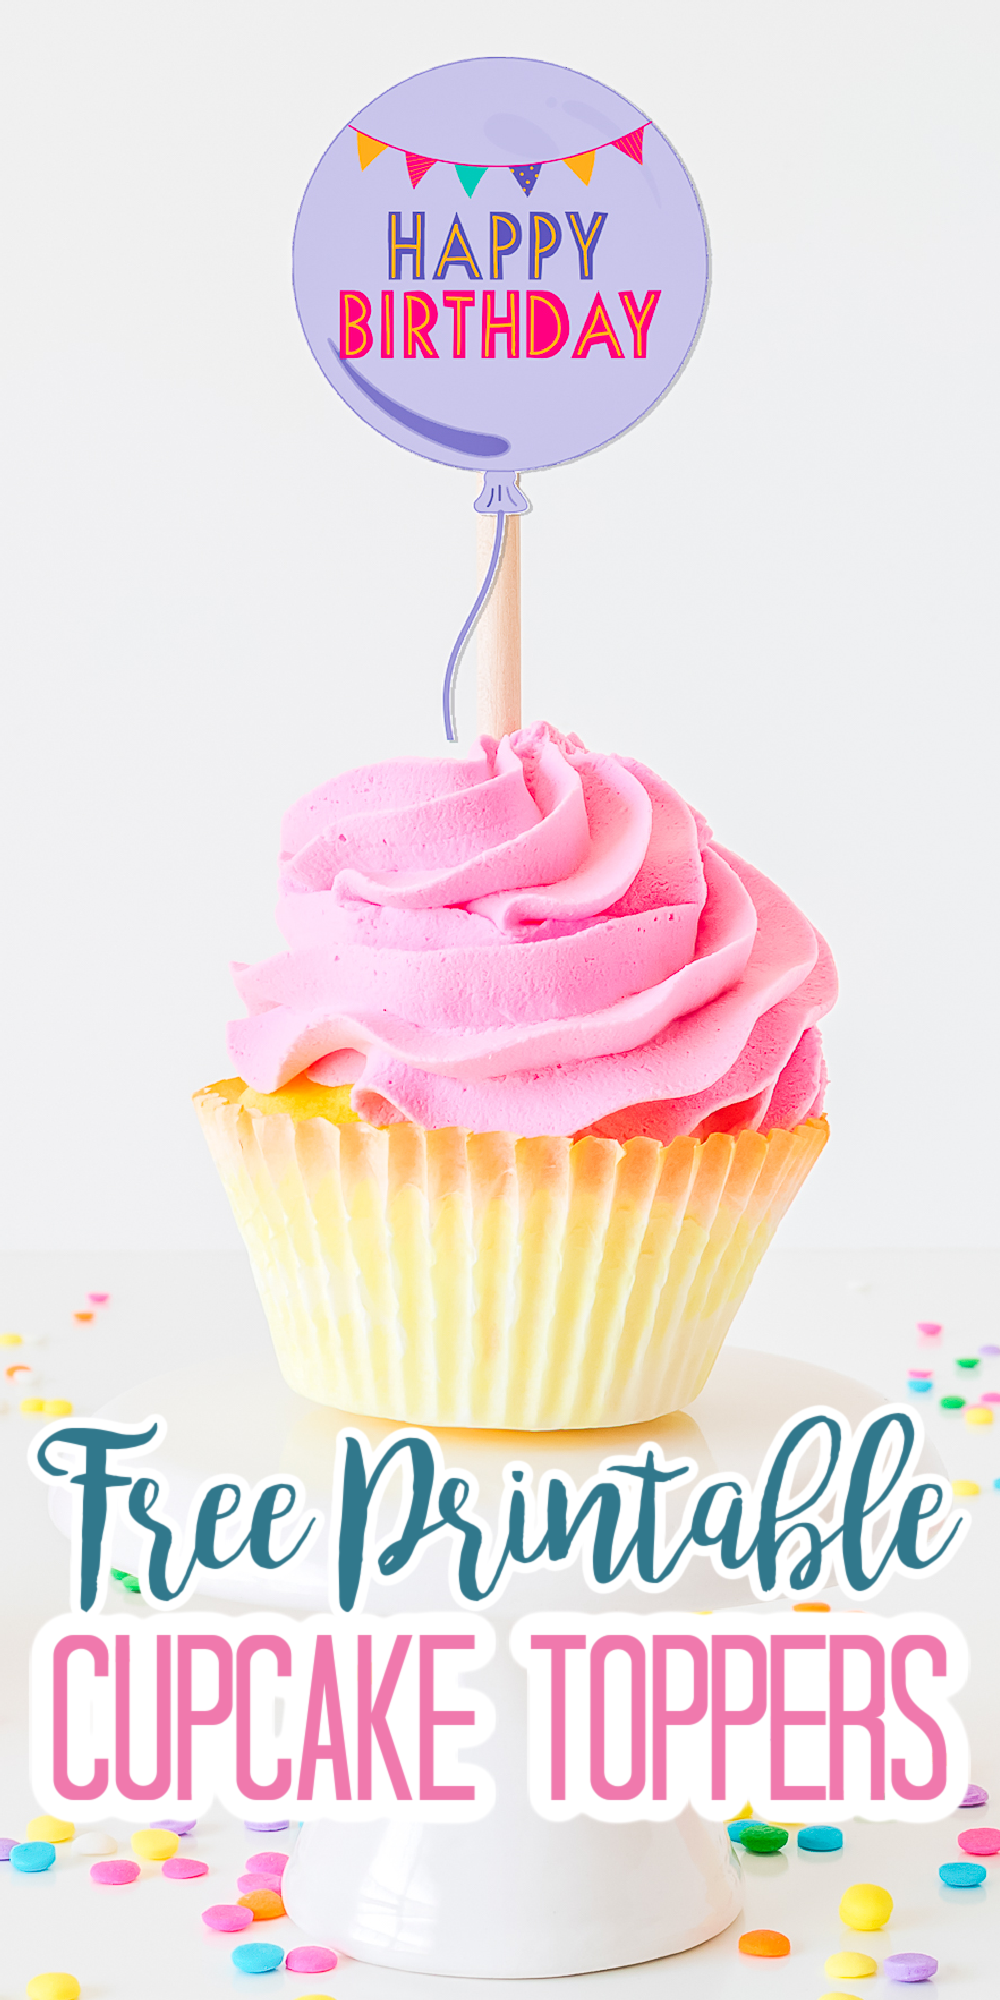 Free Printable Cupcake Toppers And More Party Printables The Country Chic Cottage